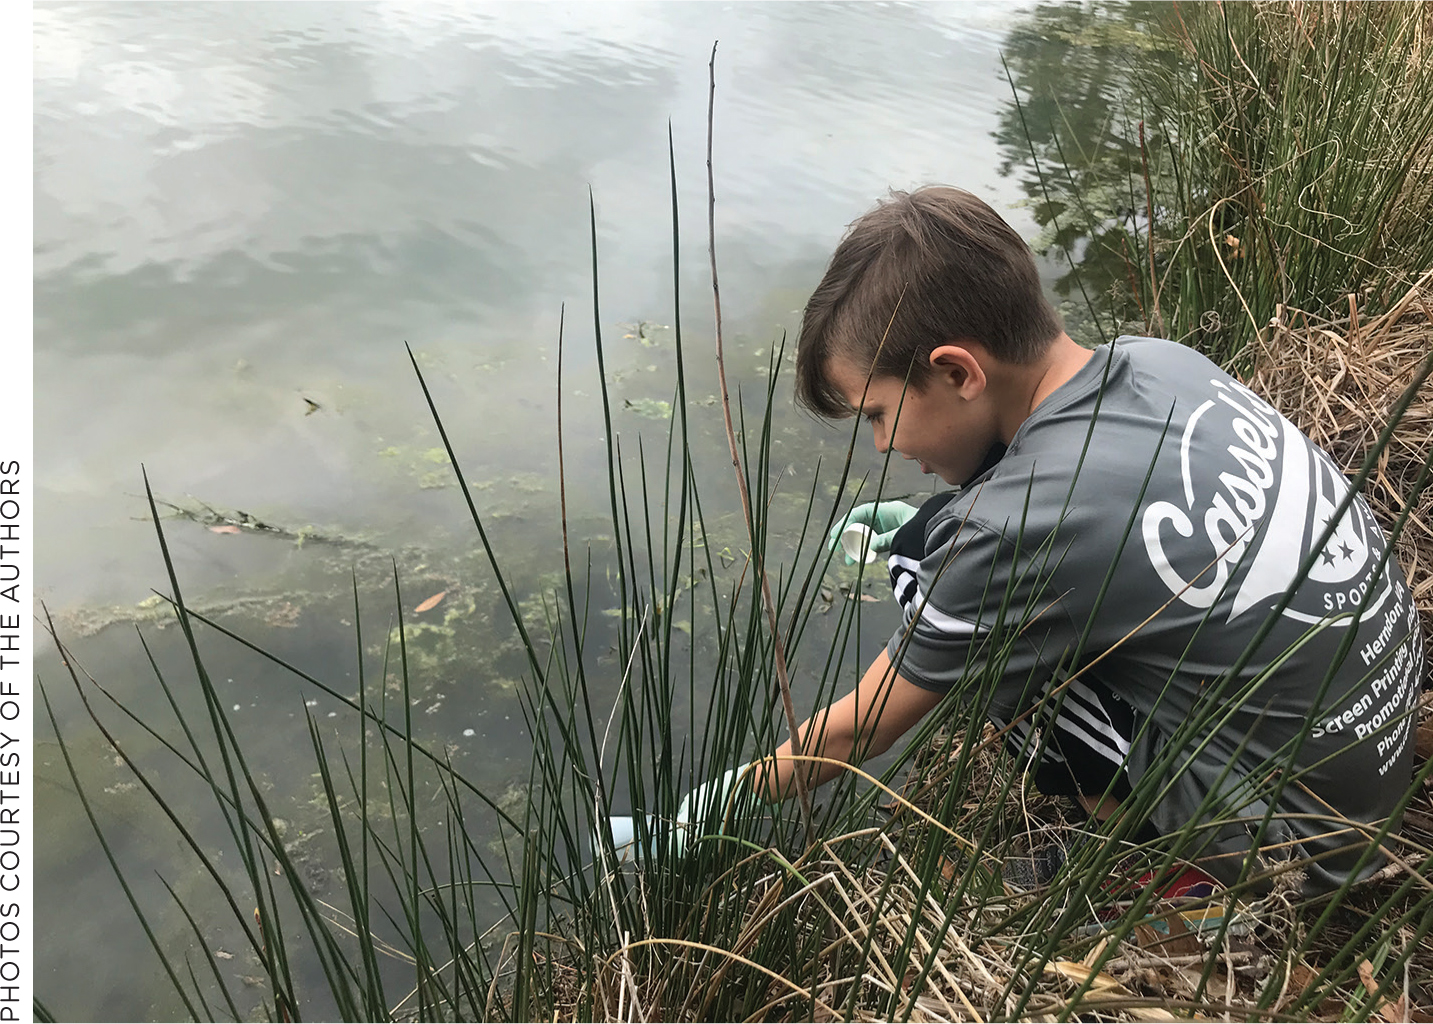 A student collects a water sample (chaperone out of frame!).